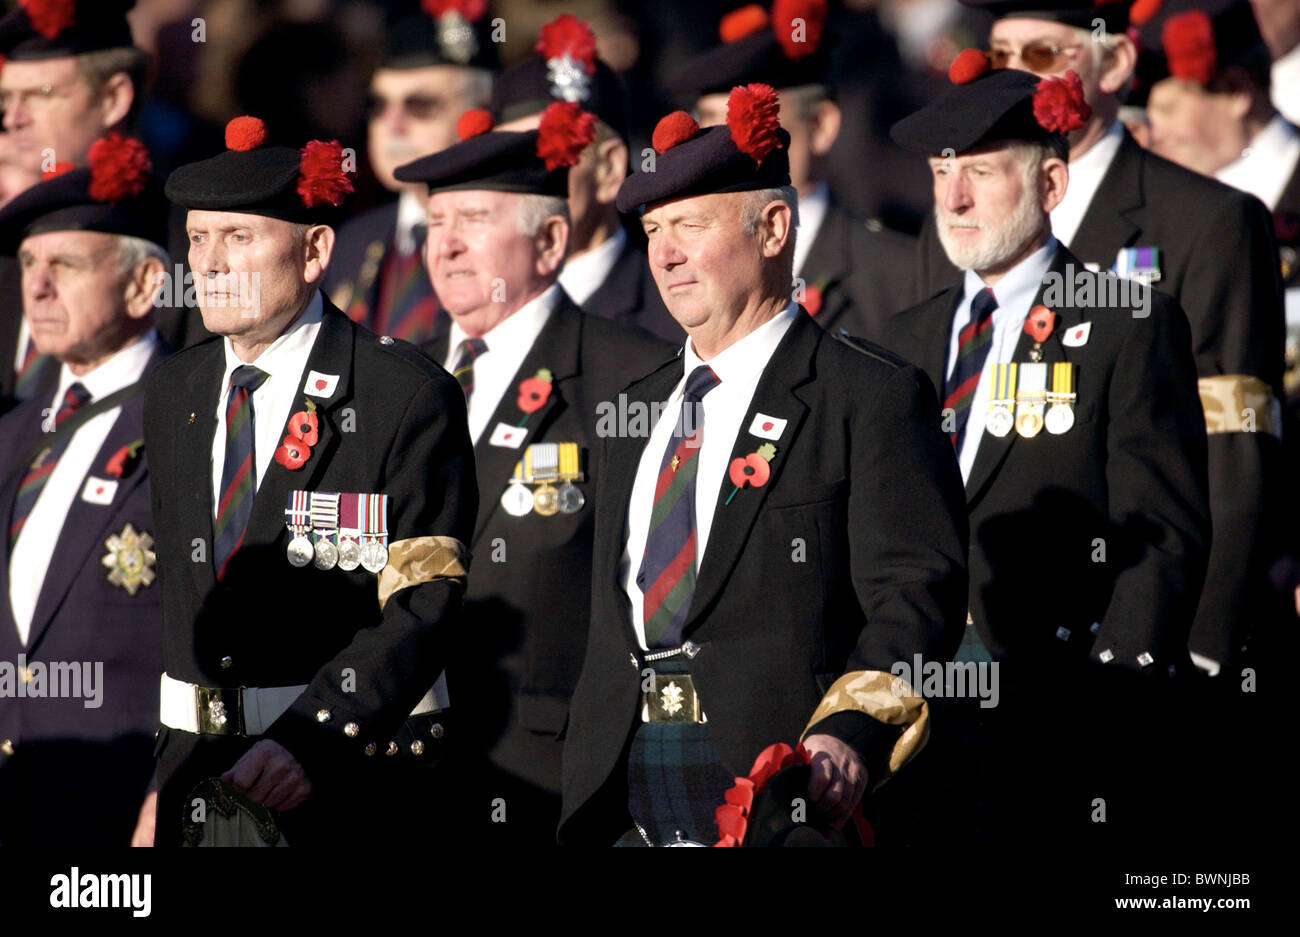 Veterans of the Black Watch with camouflage armbands for colleagues losing lives in Iraq war, at Remembrance Day Cenotaph London Stock Photo